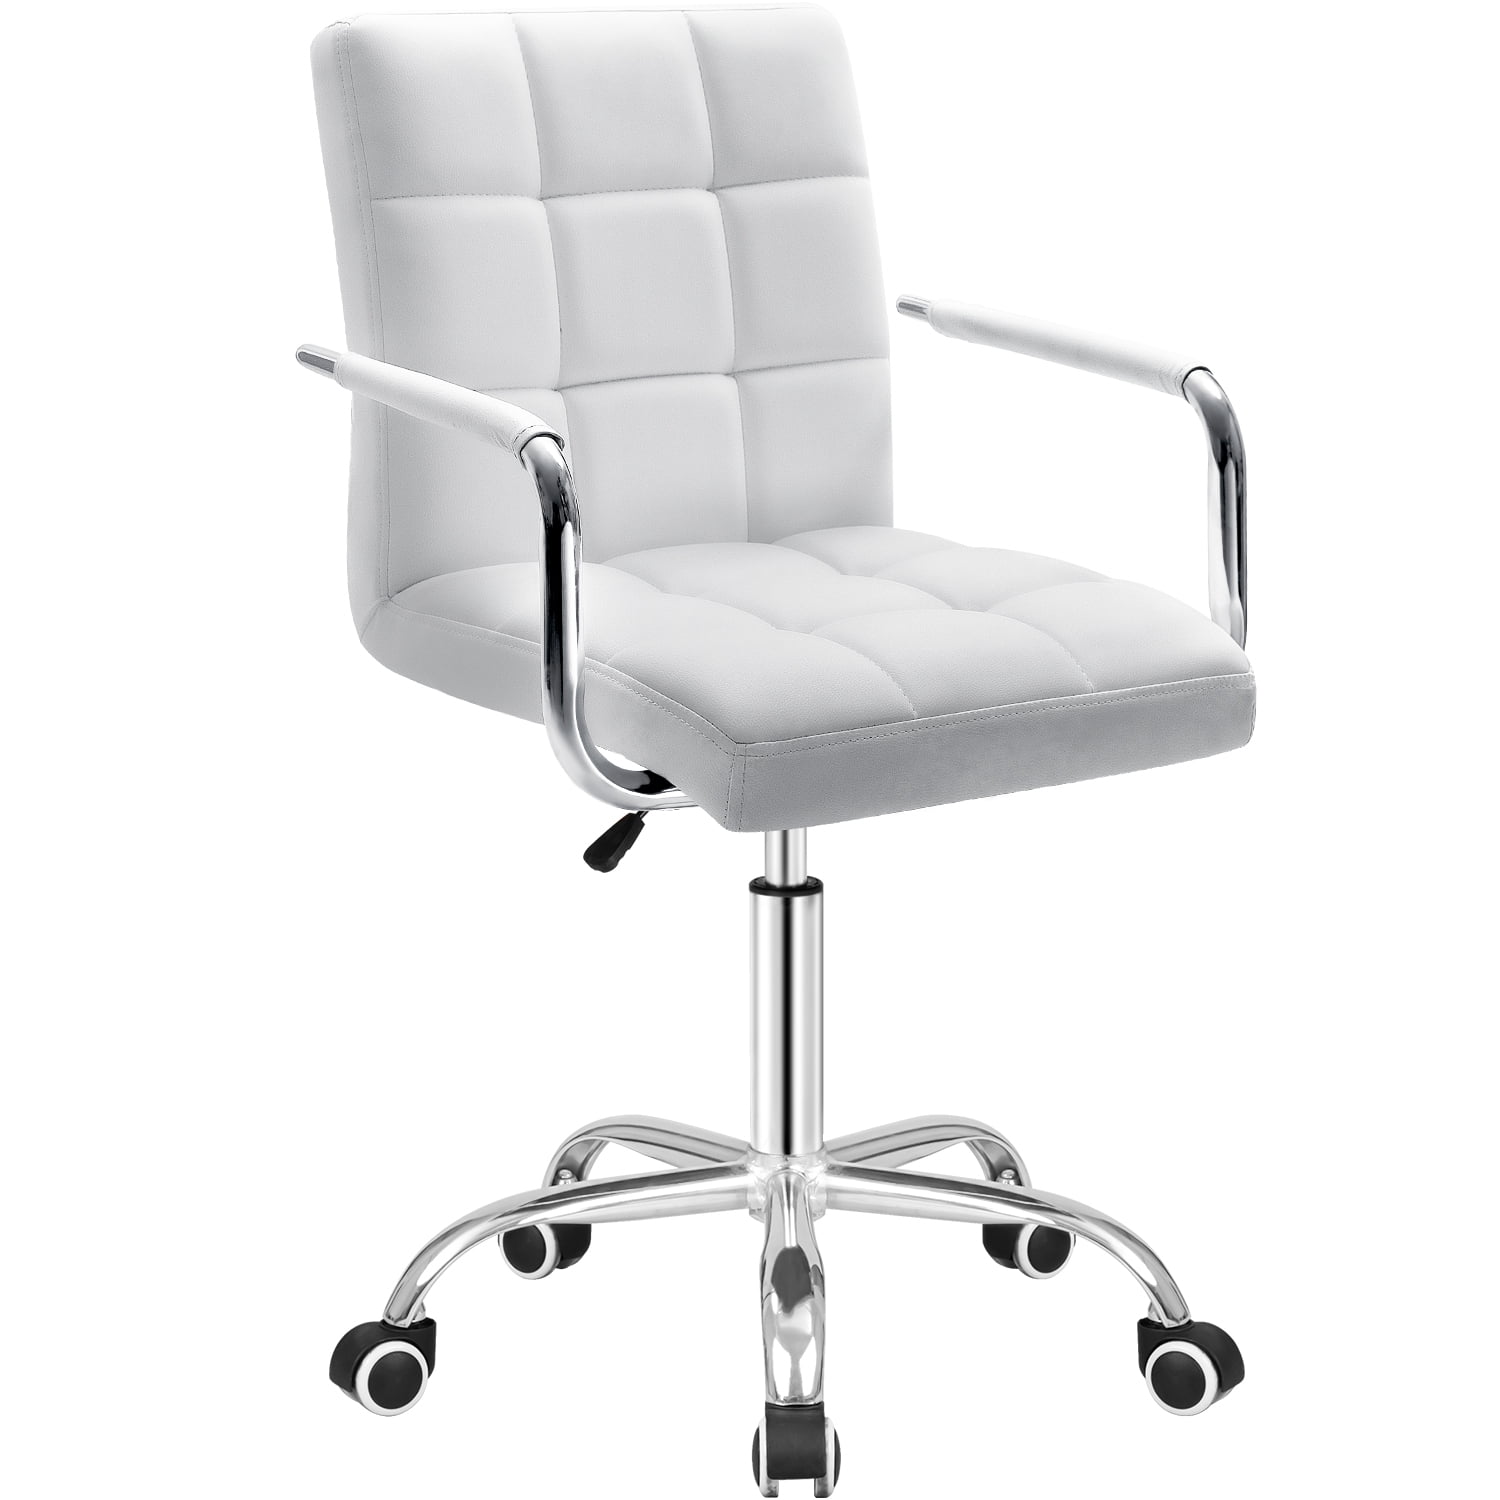 Furmax Task Chair with Swivel & Adjustable Height, 260 lb. Capacity, White